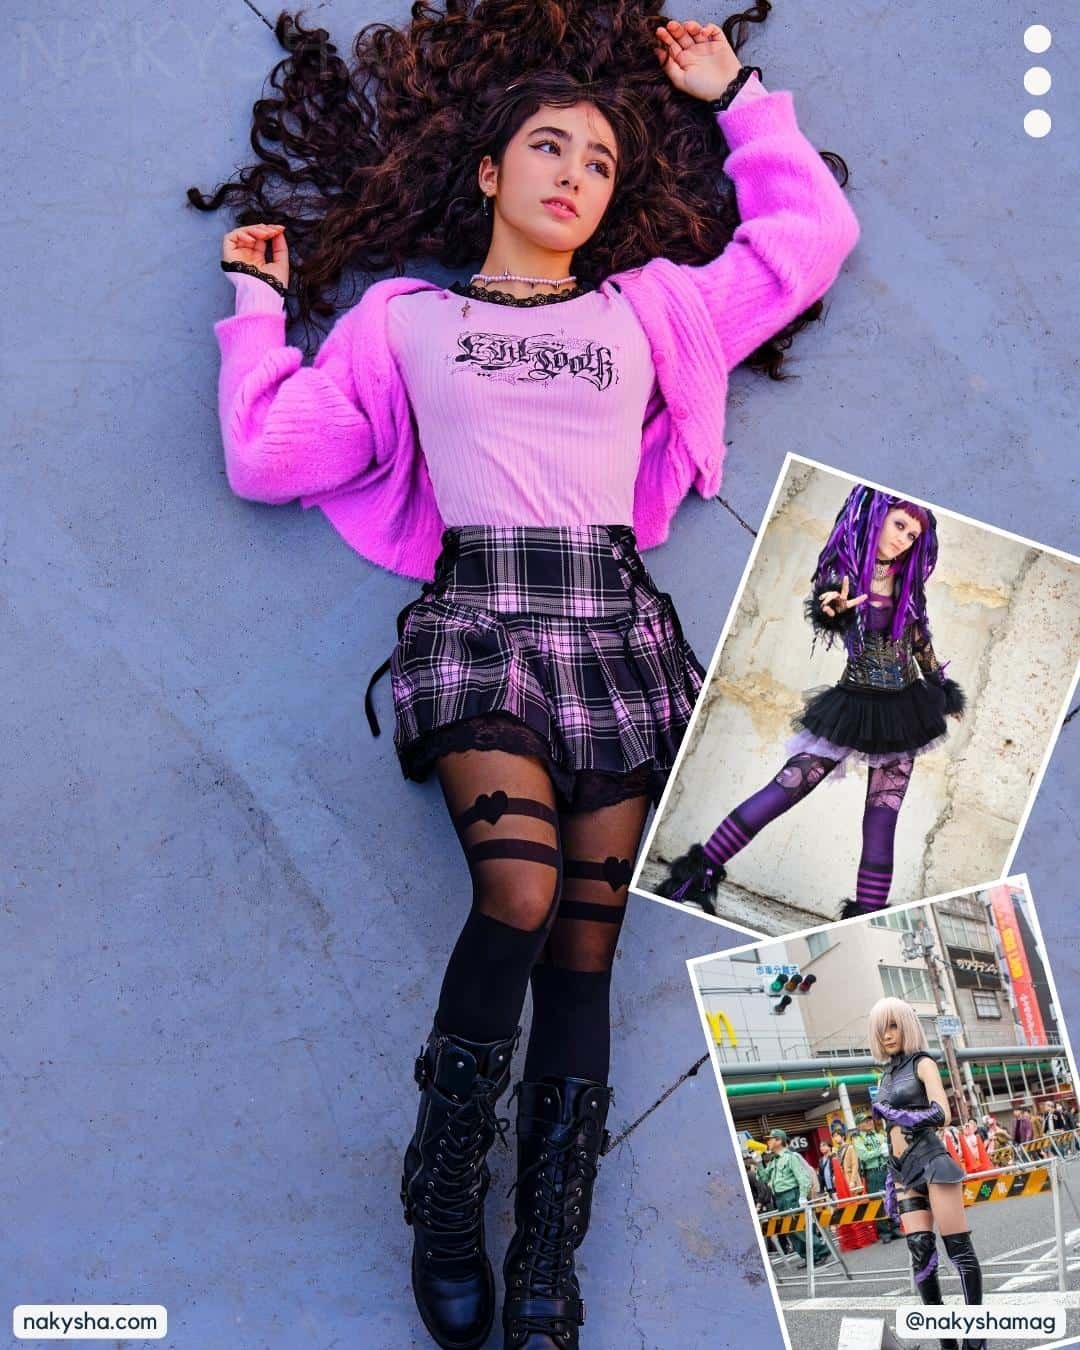 How To Be A Pastel Goth - Attitude Clothing Blog